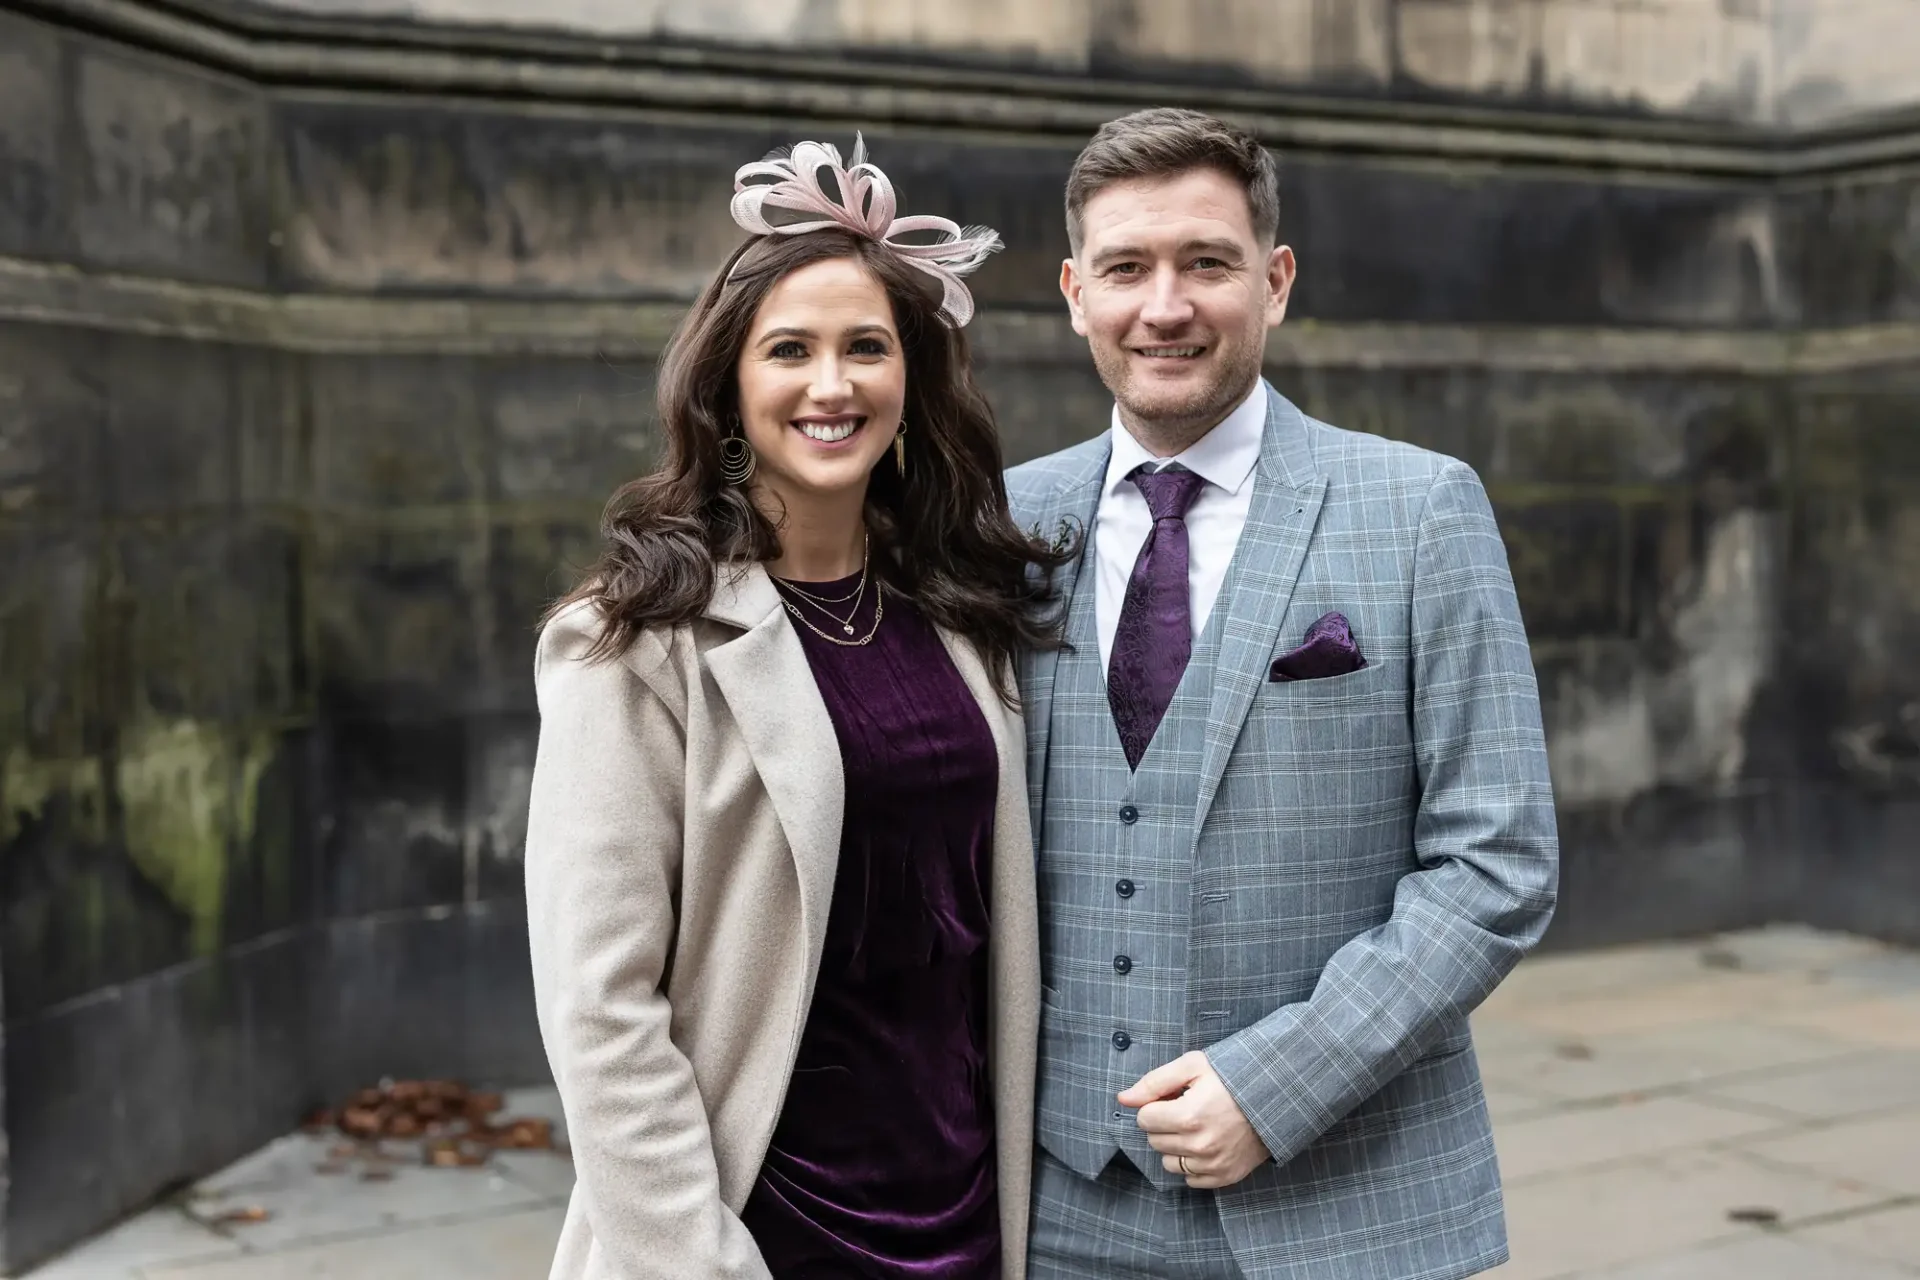 A man and woman, dressed formally, smiling outdoors; the man wears a plaid suit and the woman a dress with a coat and fascinator.